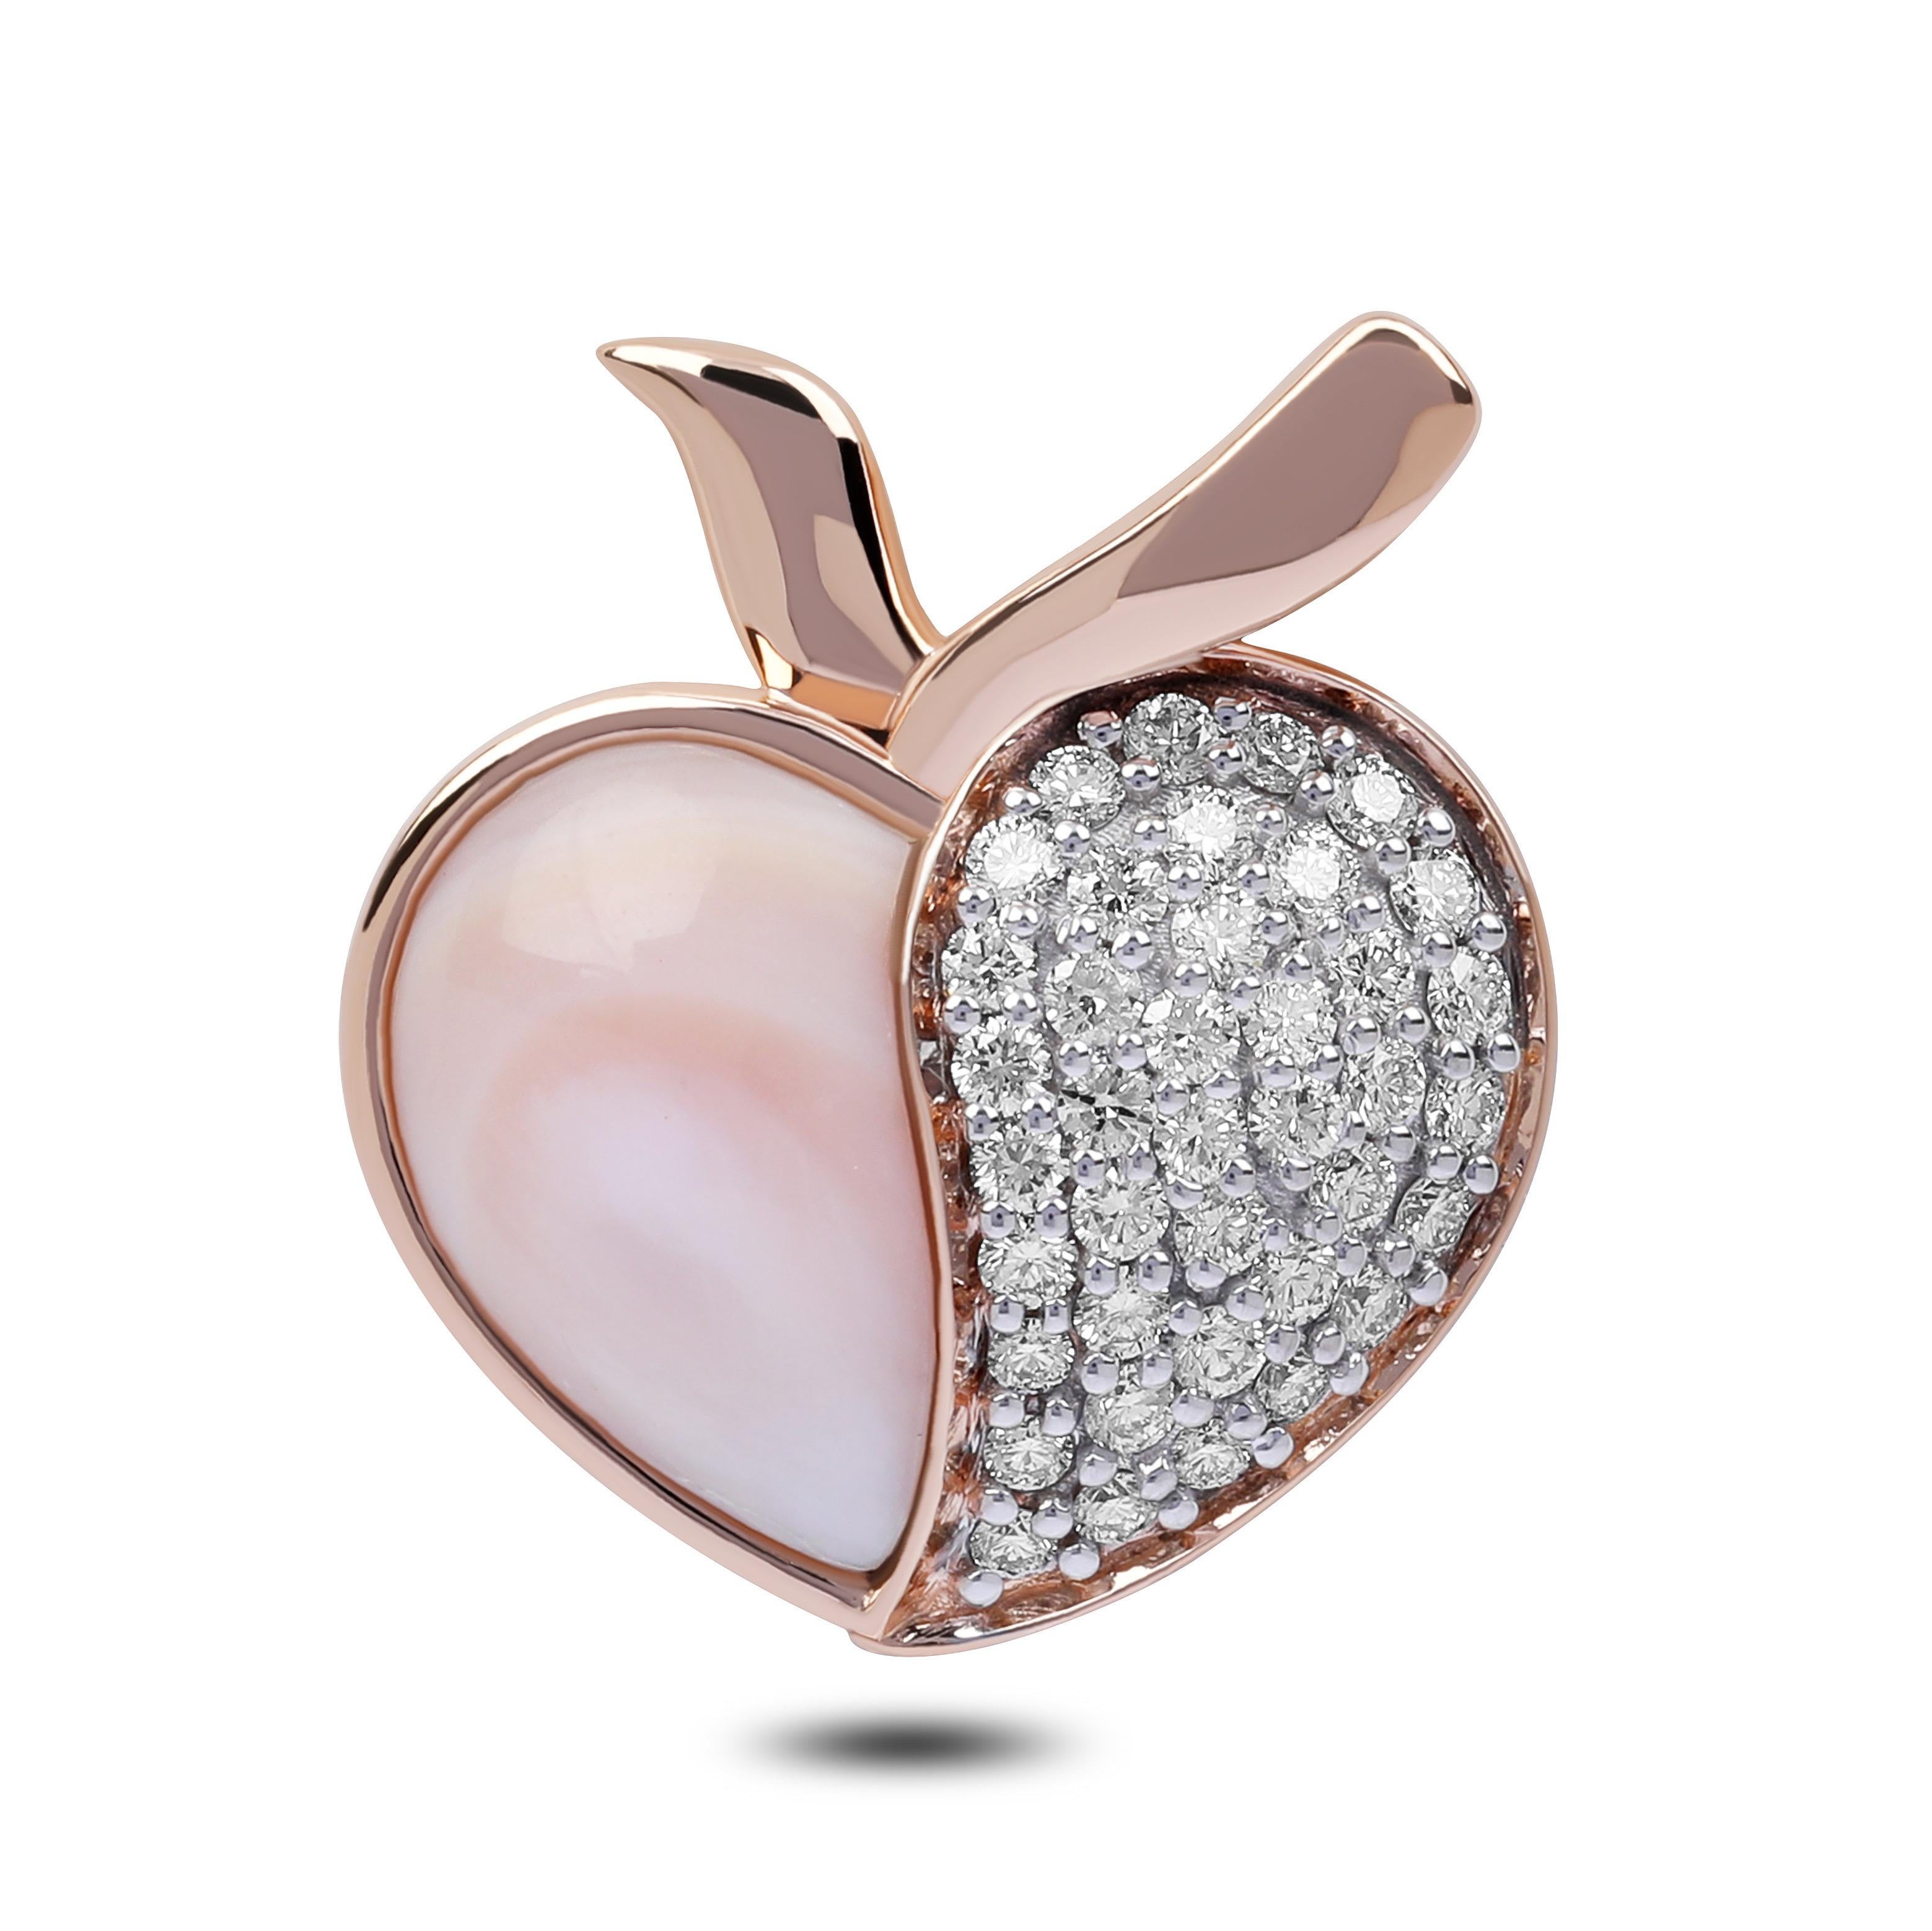 Stunning Heart Pendant with Mother Of Pearl in 18k Rose Gold and Diamond.
Gleaming 18k Rose gold 4.330gm
Illuminating VVS Diamond 0.46ct
Hand crafted with latest technology and methods.
Certified by renowned Gemological Institute EGL. 